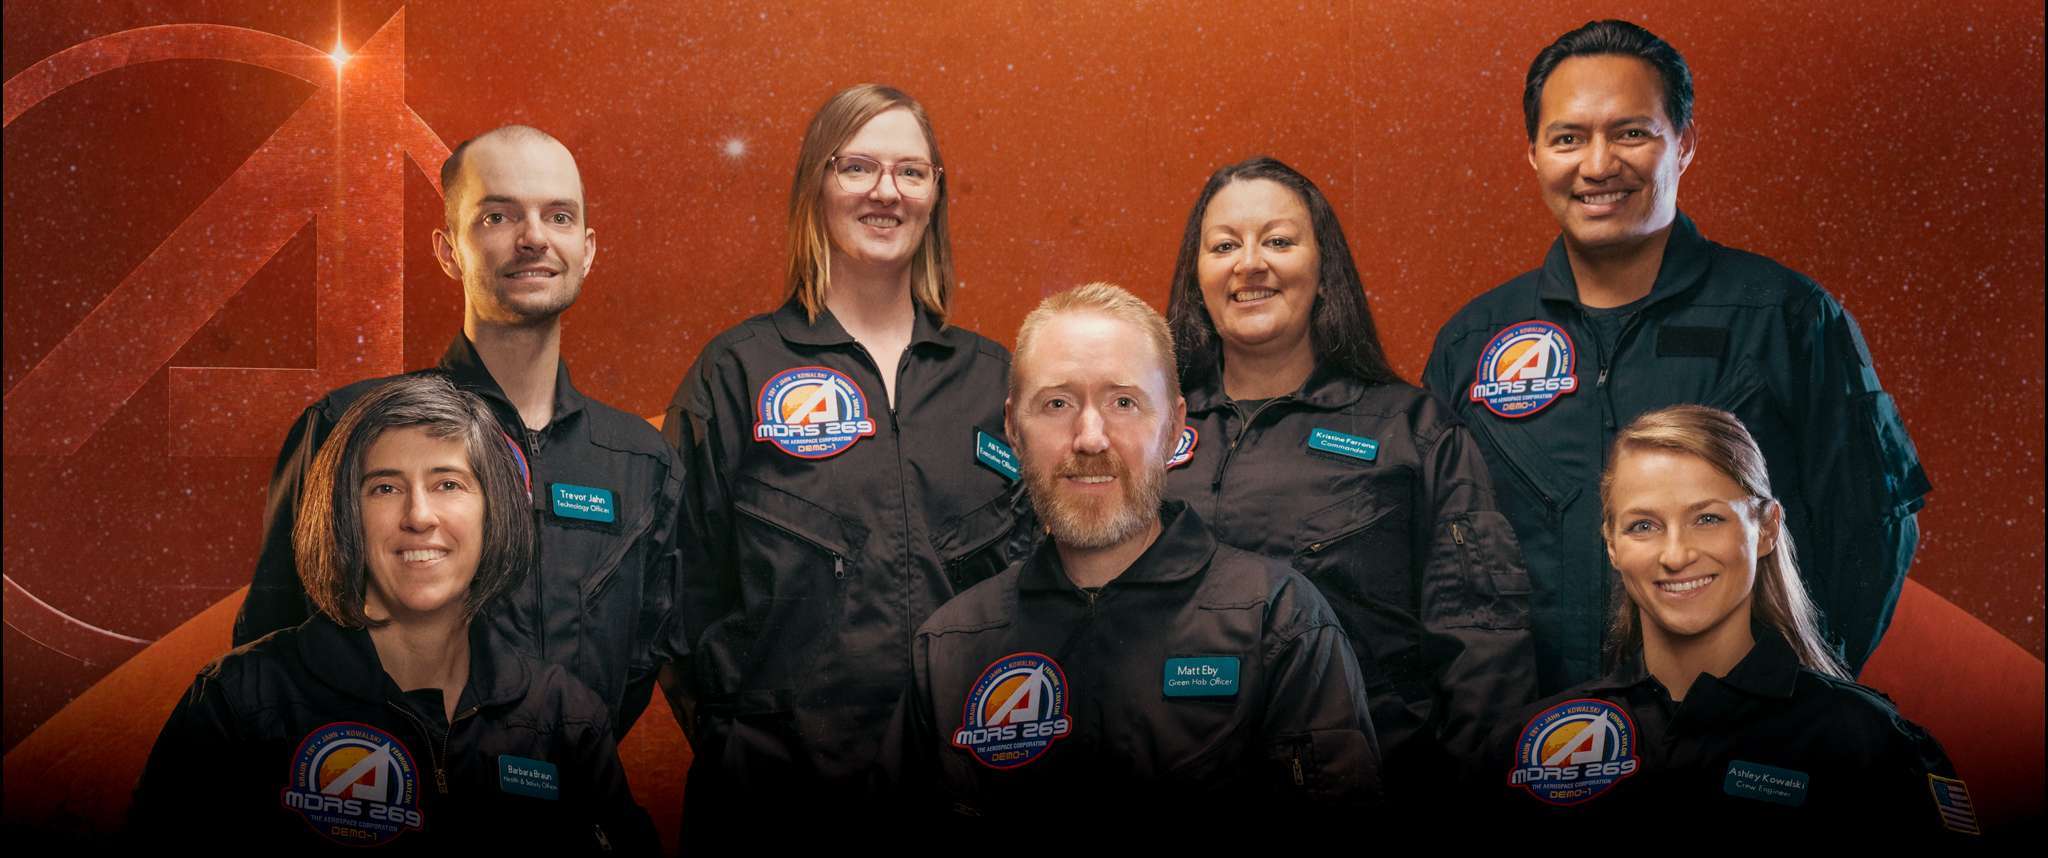 The six-person MDRS Crew 269 is leading the first all-Aerospace crewed analog mission in the corporation's history and intends to bring back valuable lessons learned to help drive Aerospace's human spaceflight expertise.